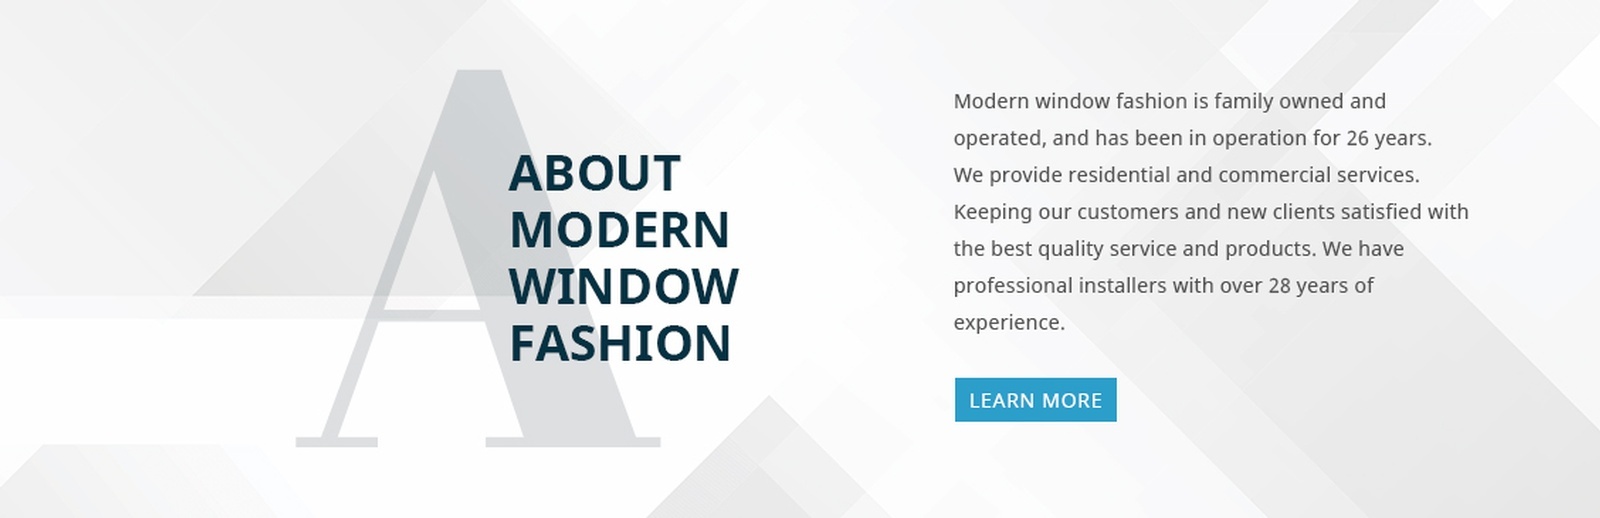 About Modern Window Fashion - Window Covering Services Canada